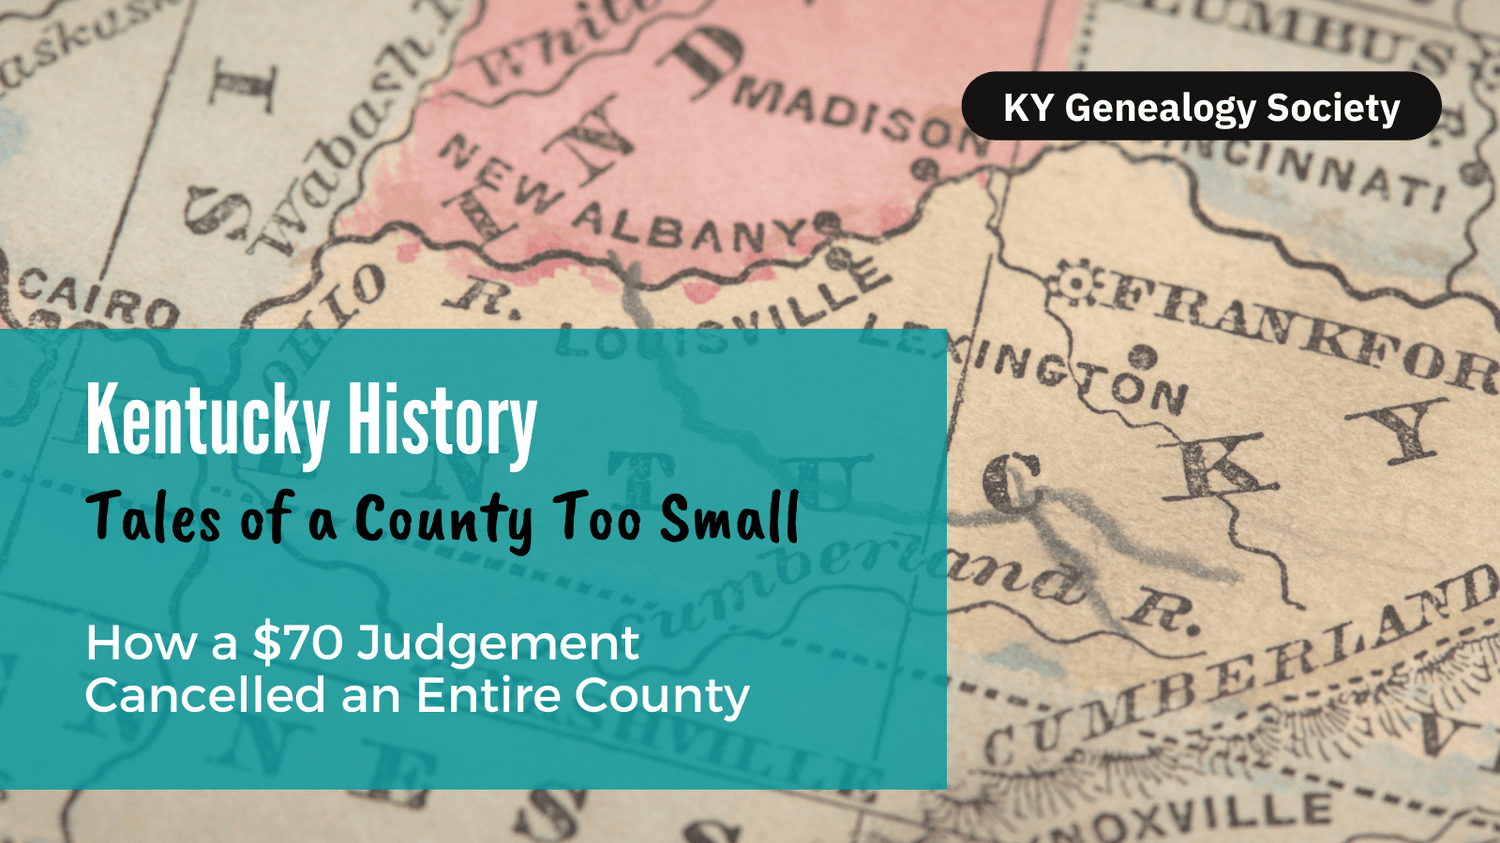 Kentucky History: Tales of a County Too Small